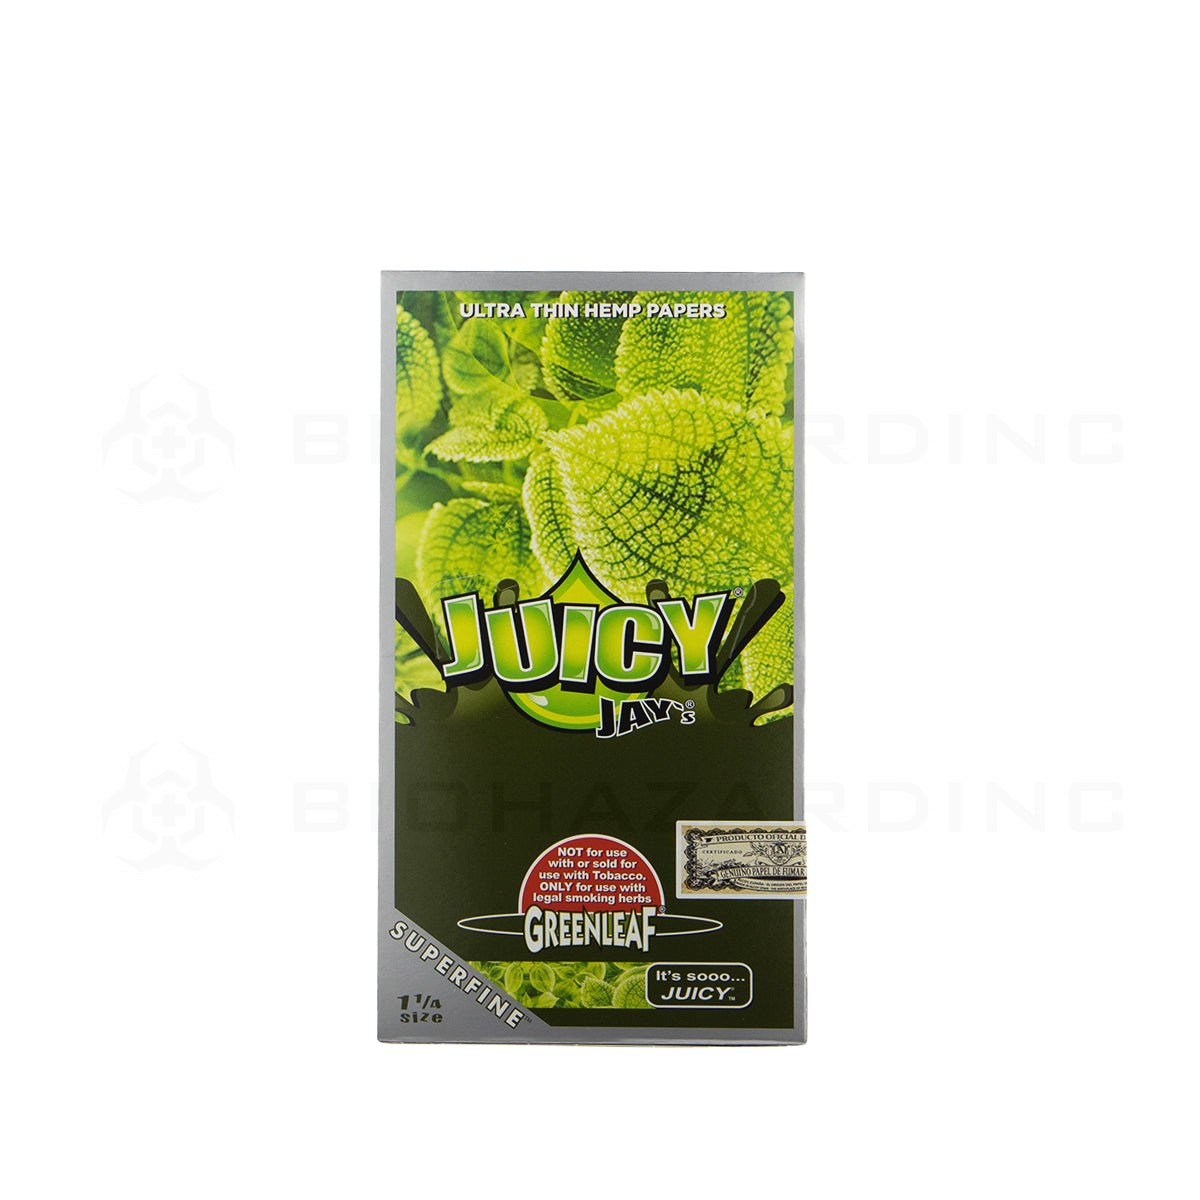 Juicy Jay's® | Wholesale Superfine™ Ultra Thin Hemp Papers Classic 1¼ Size | 78mm - 24 Count - Various Flavors Rolling Papers Juicy Jay's Greenleaf  